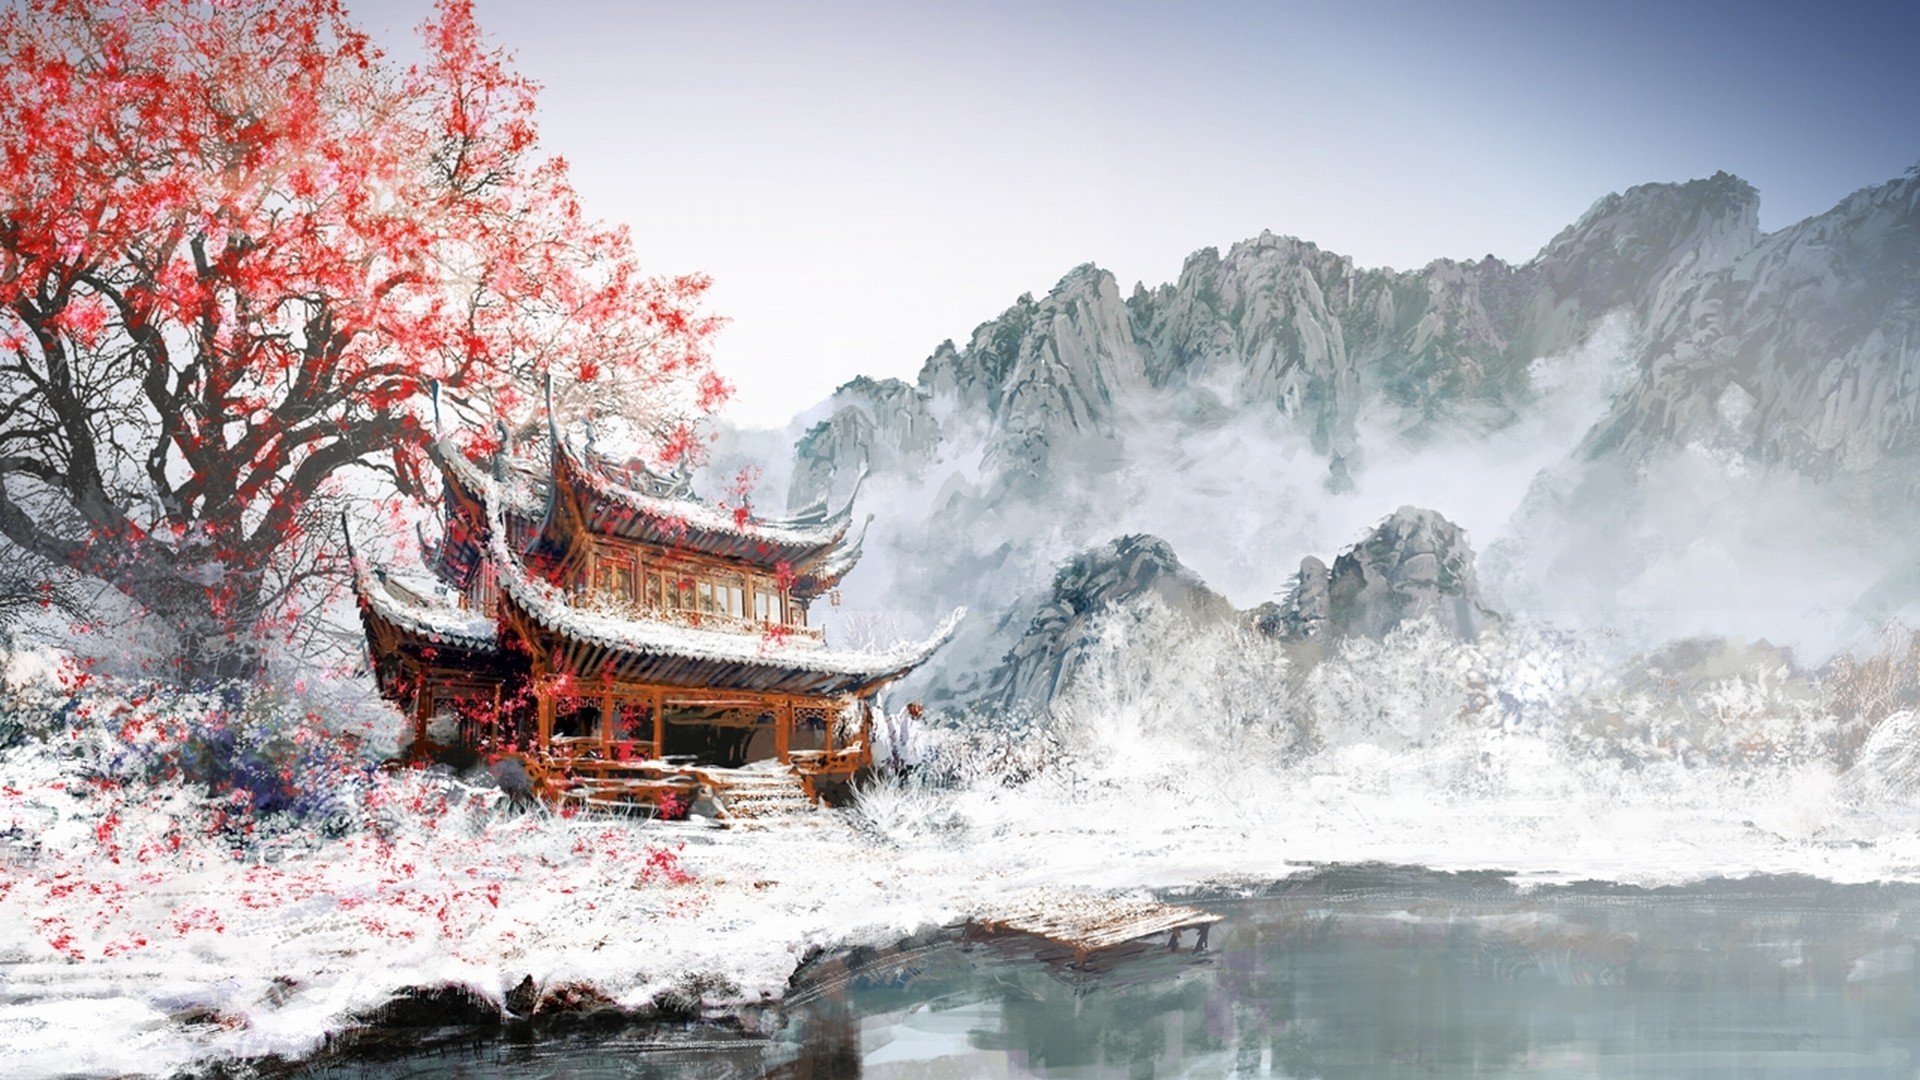 fantasy art, Japan, snow, mountains, painting, winter, white, cherry blossom Gallery HD Wallpaper